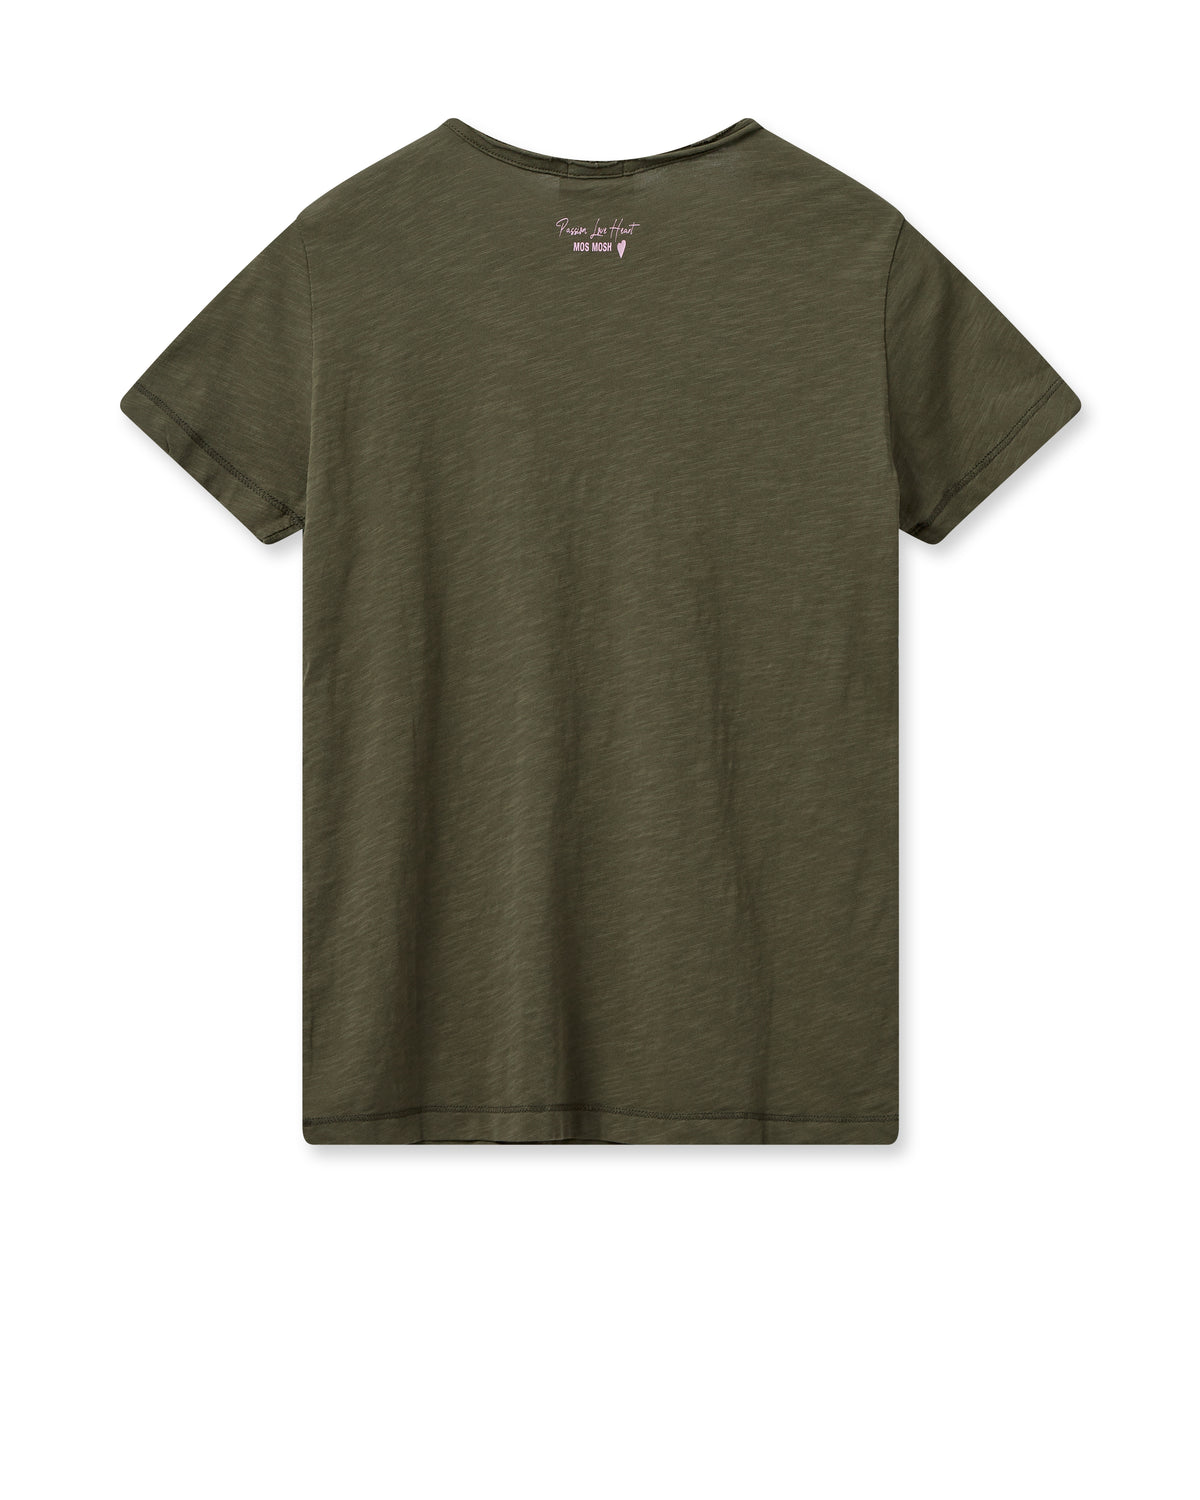 Khaki green cotton tee wiht v neck and three button fastening rear view